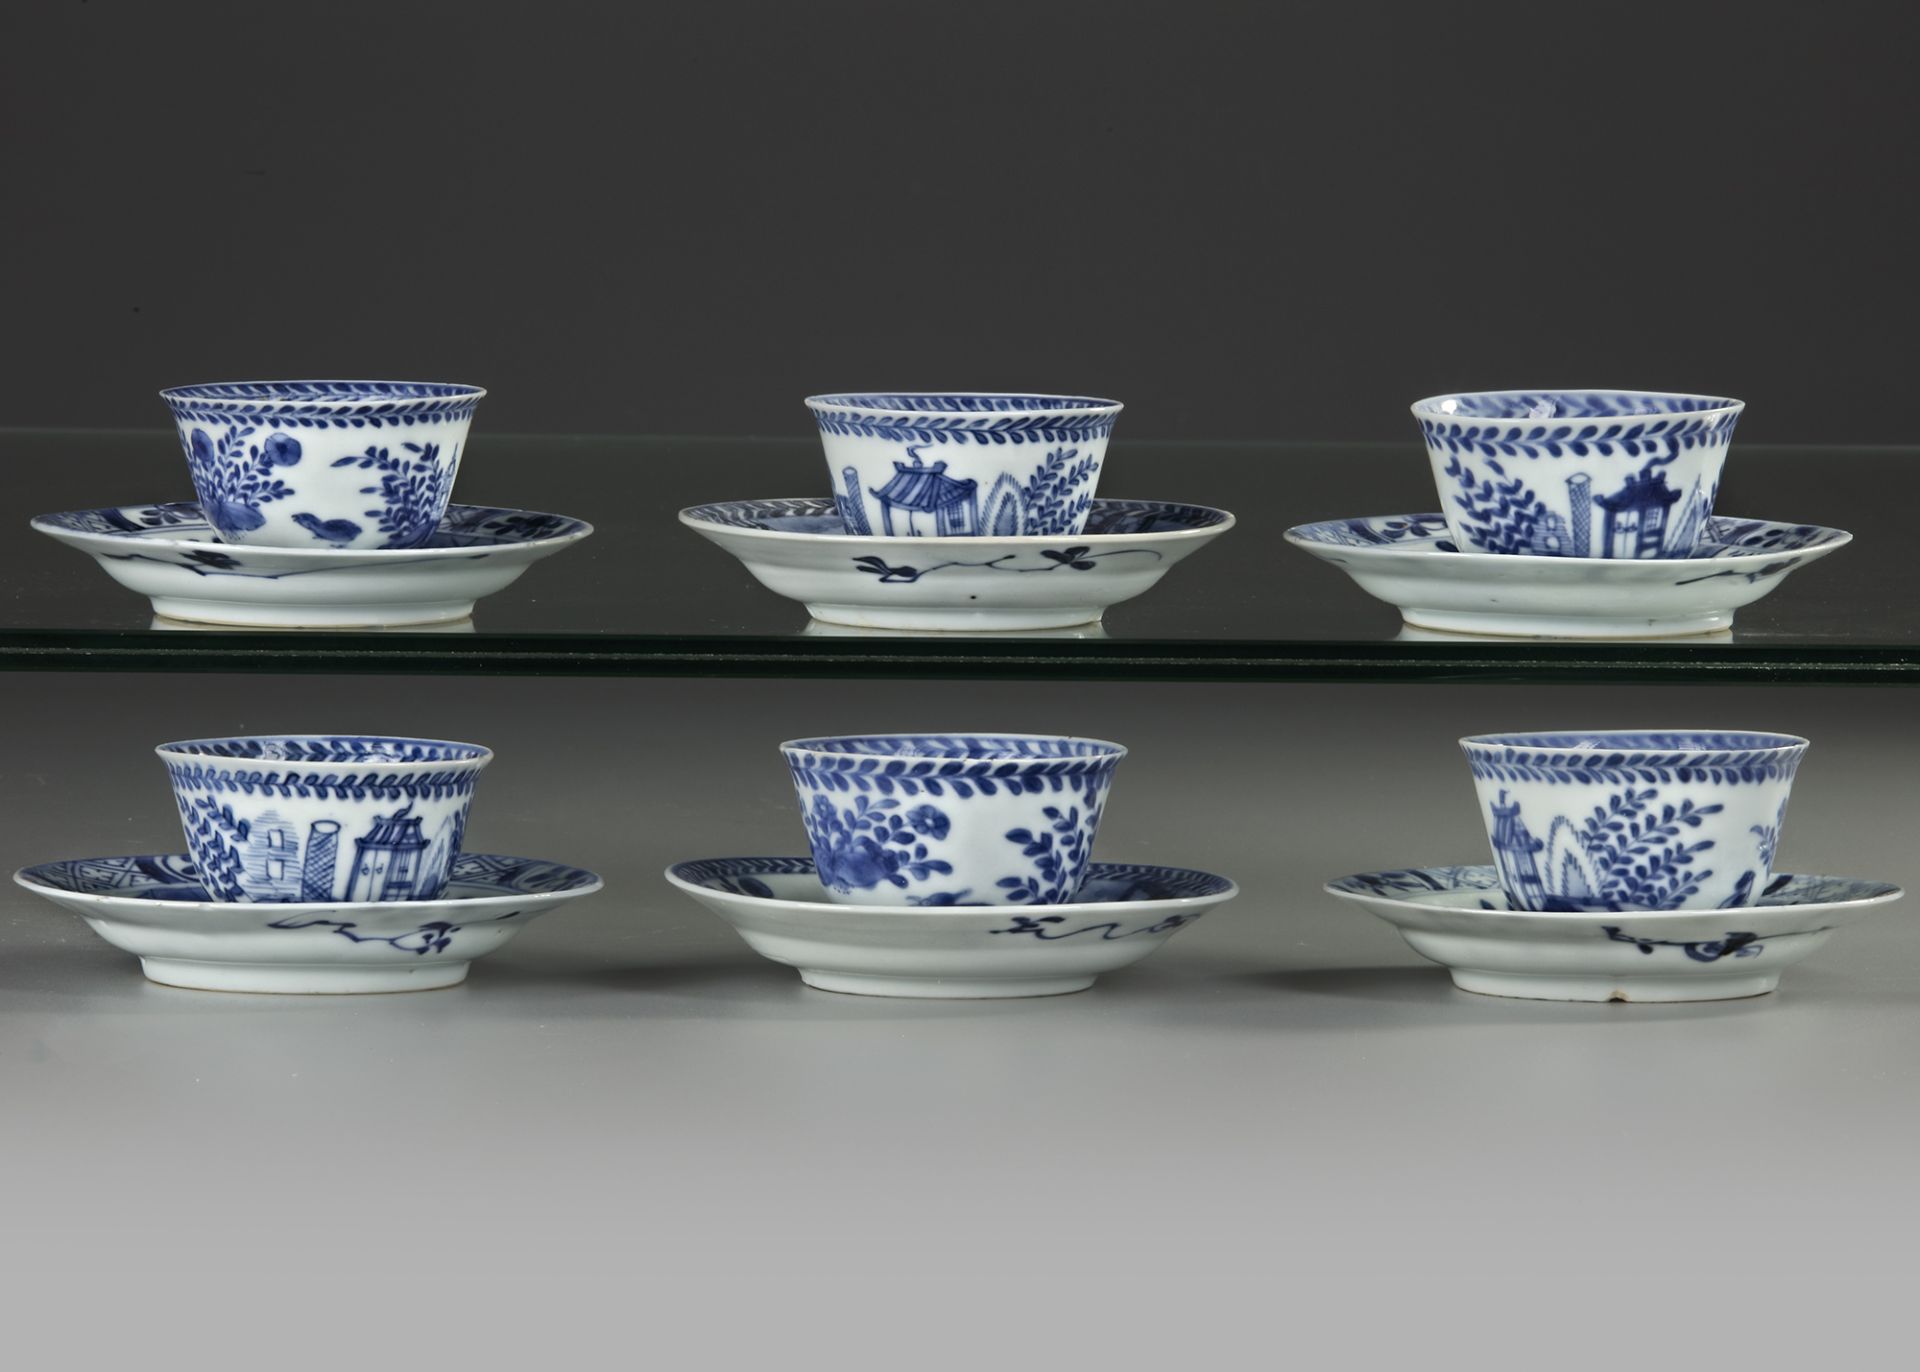 SIX CHINESE BLUE AND WHITE 'CUCKOO IN THE HOUSE' CUPS AND SAUCERS, 18TH CENTURY - Image 2 of 4